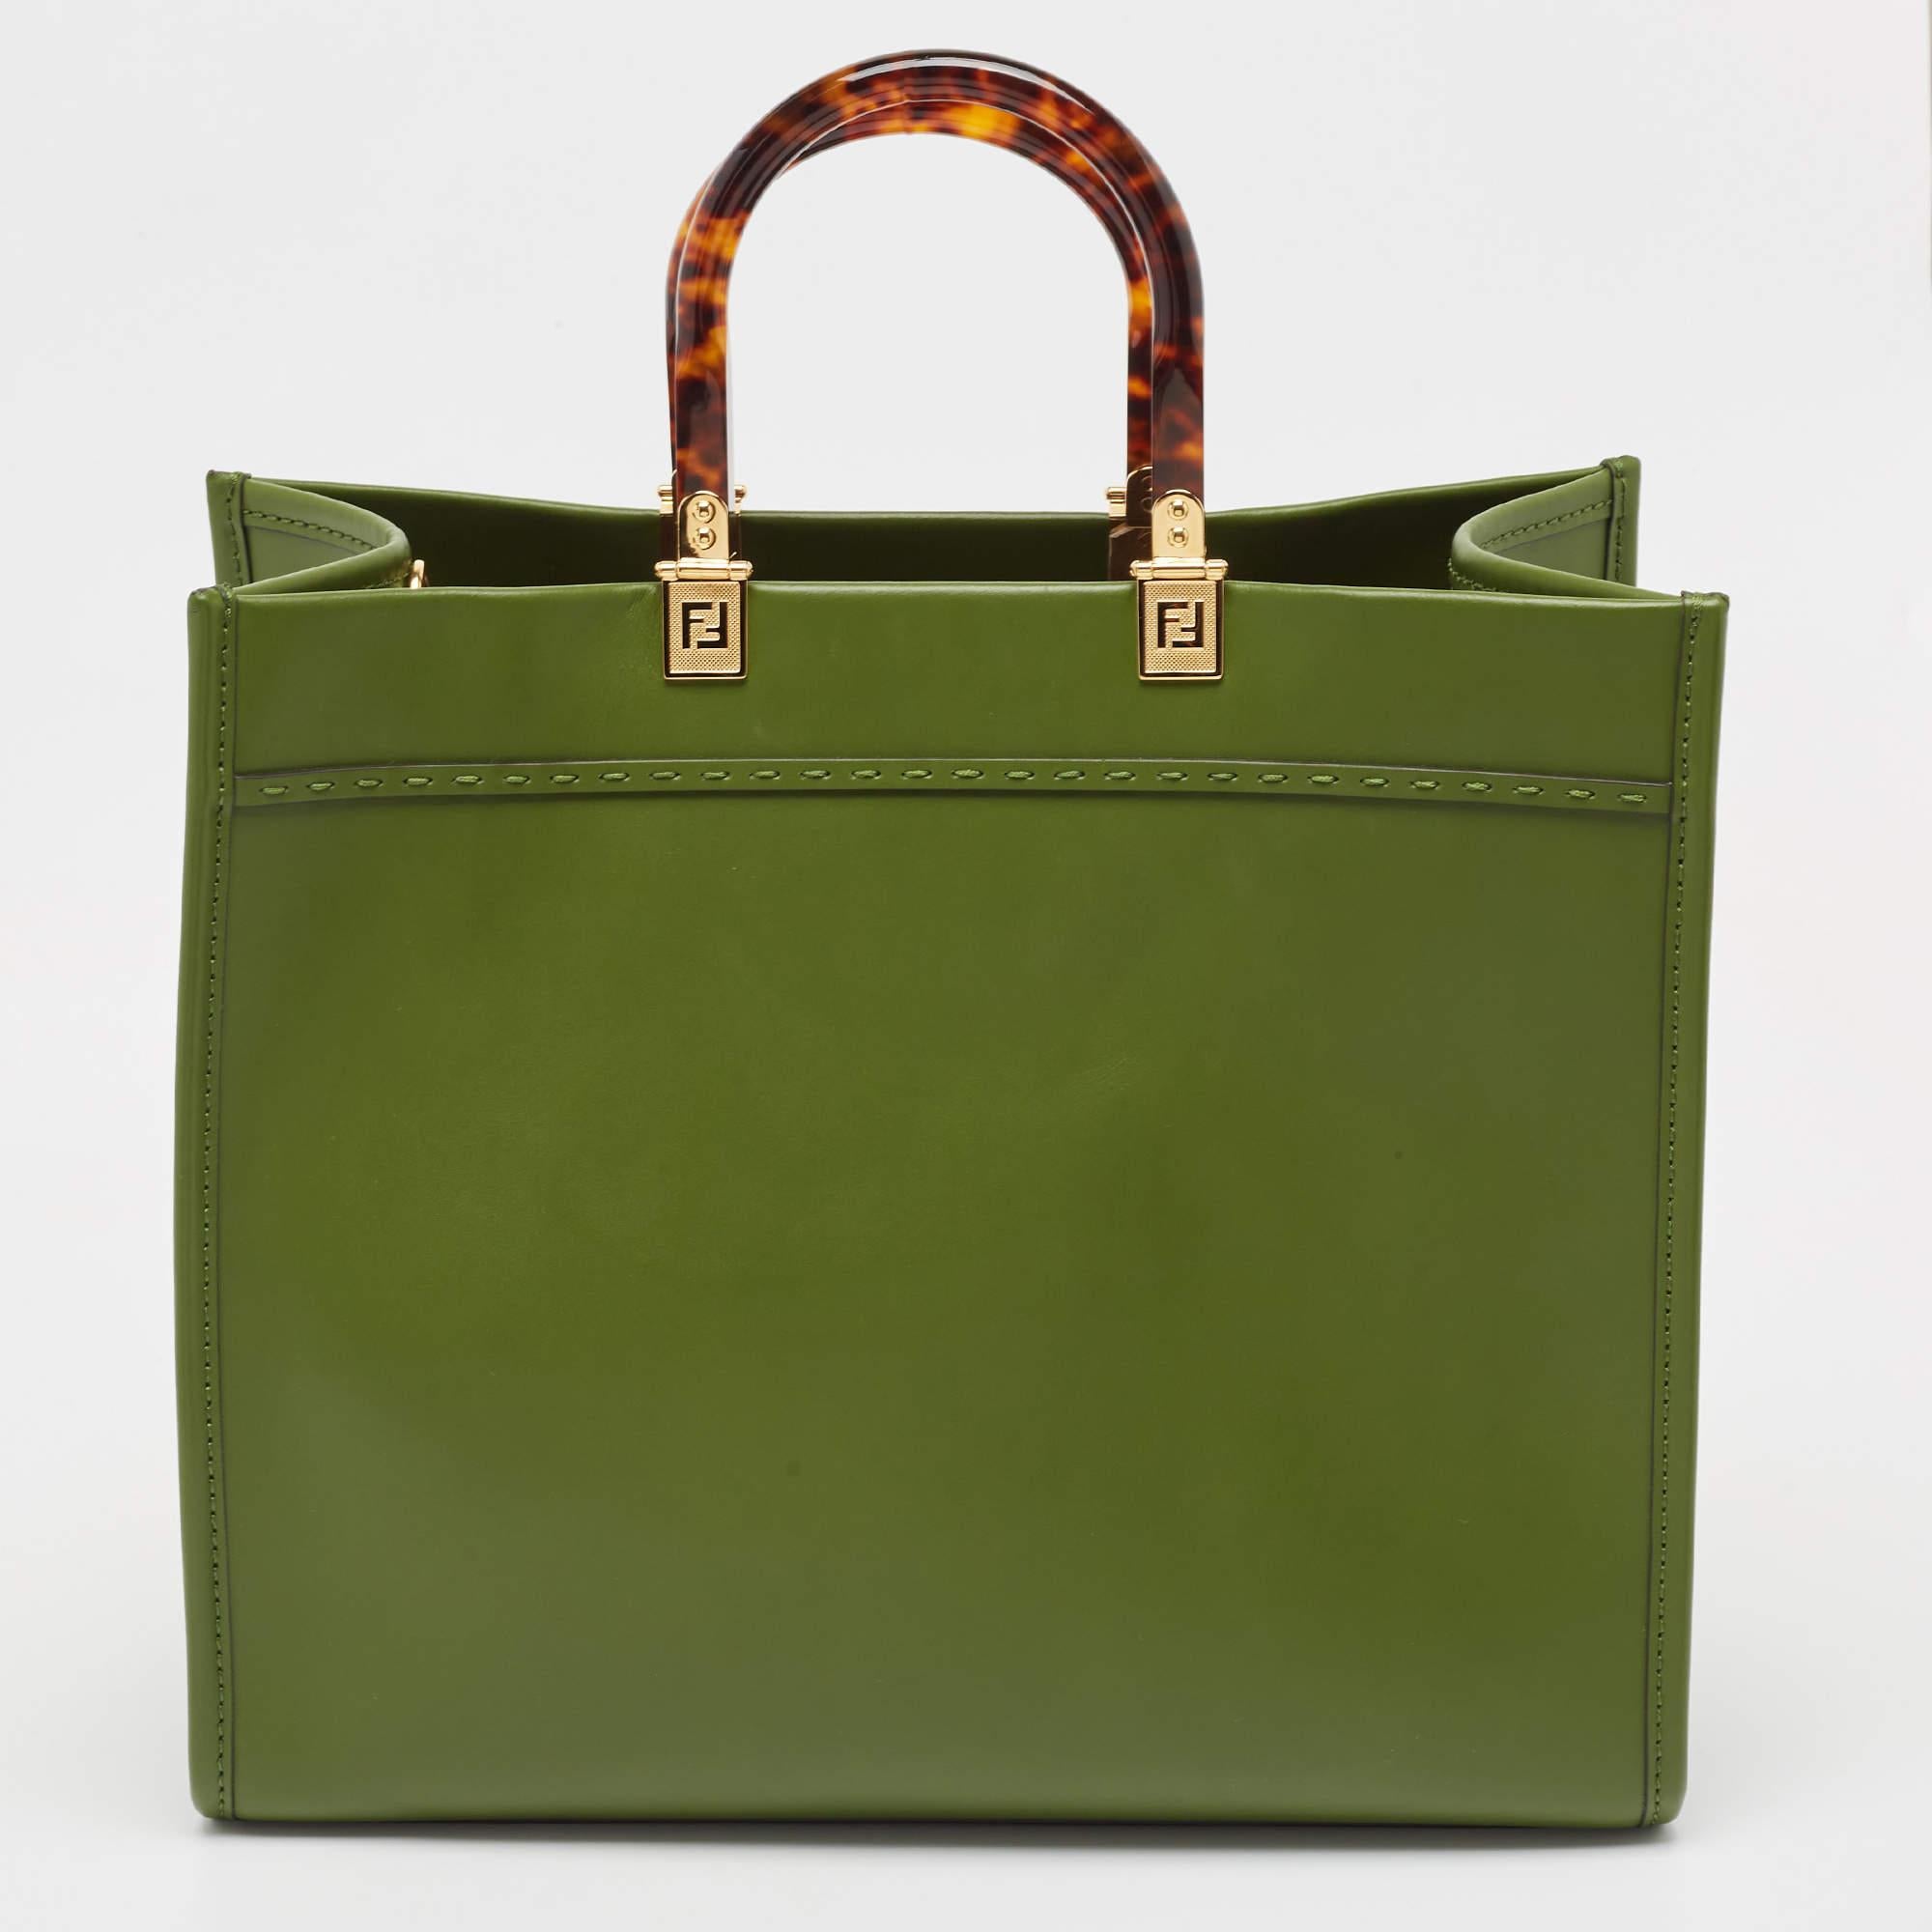 The Fendi Sunshine Tote is a luxurious and versatile handbag. Crafted from green leather, it features a spacious interior. The iconic Fendi logo is subtly embossed, and the bag is adorned with elegant gold-tone hardware.

Includes: Original Dustbag

